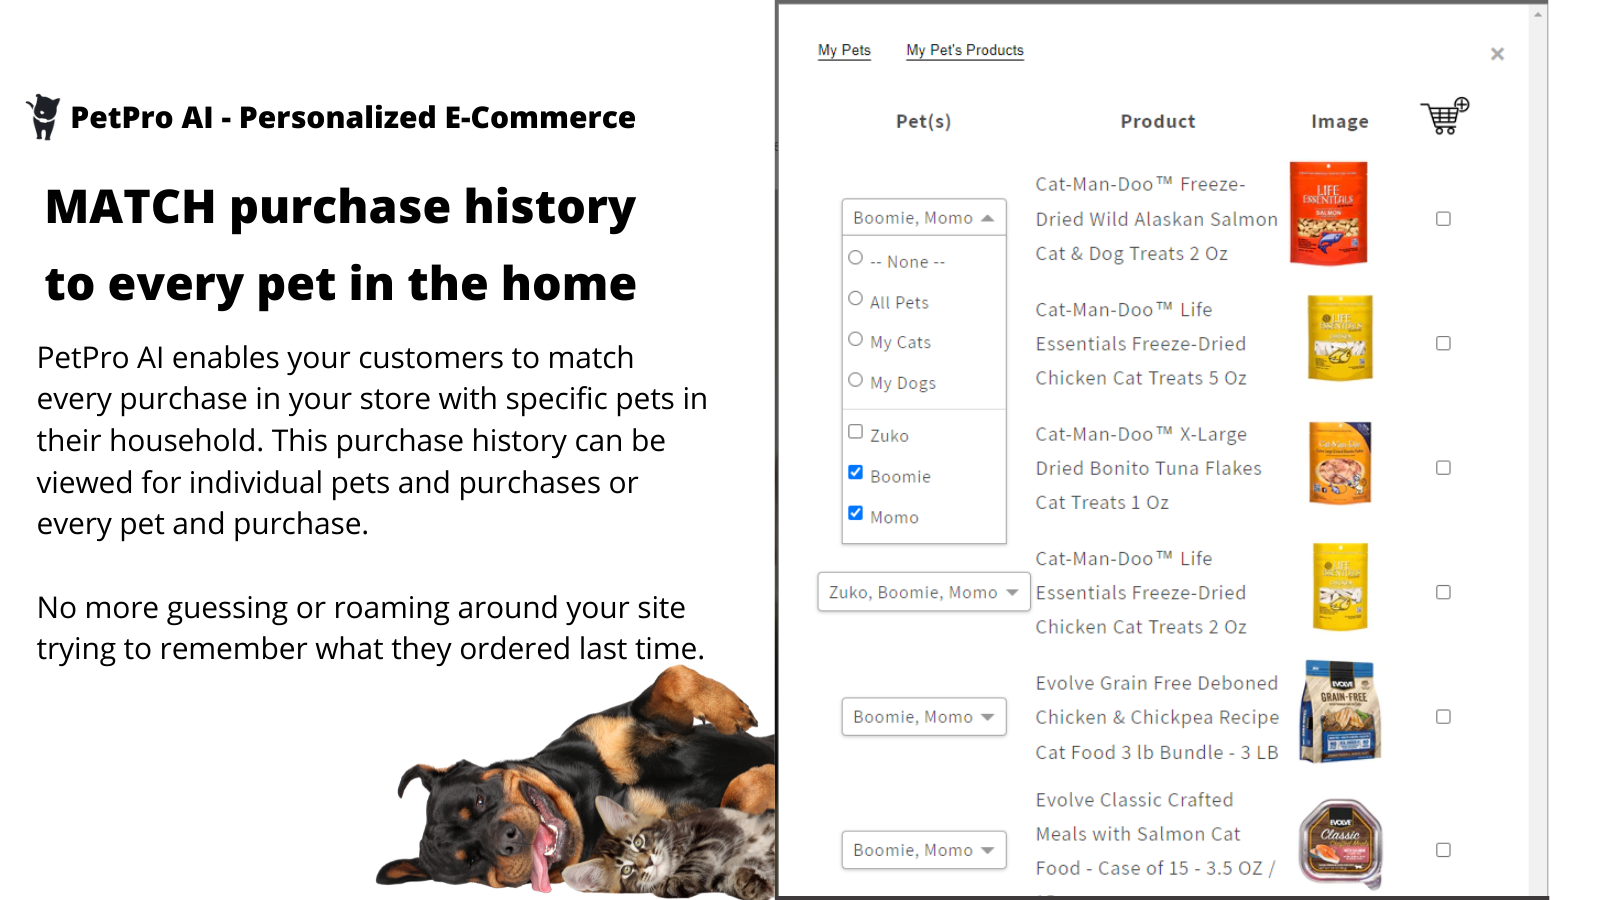 Match purchase history to every pet in a customer's home